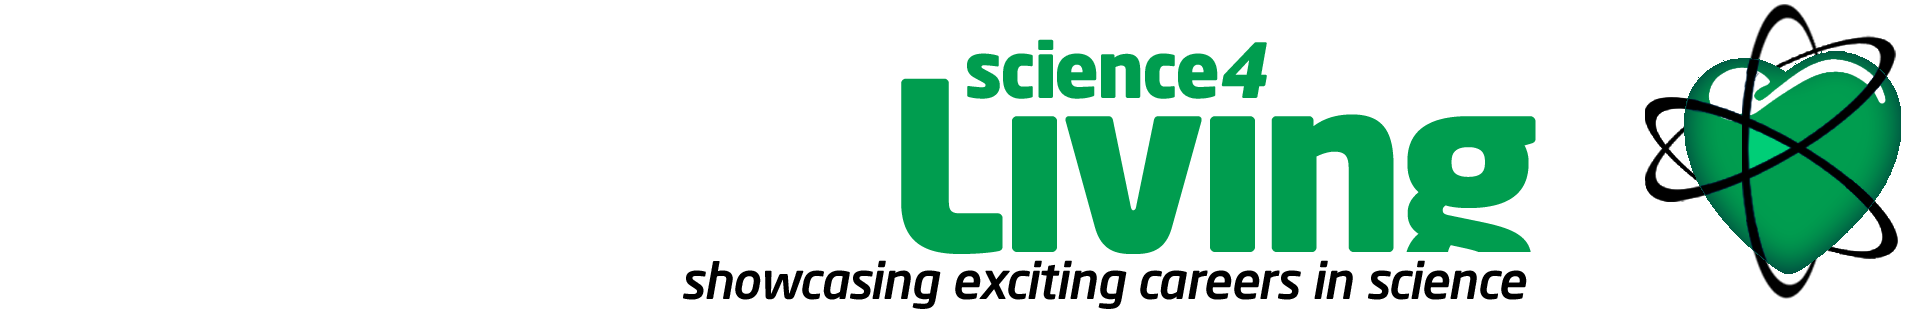 Science for Living - showcasing exciting careers in science